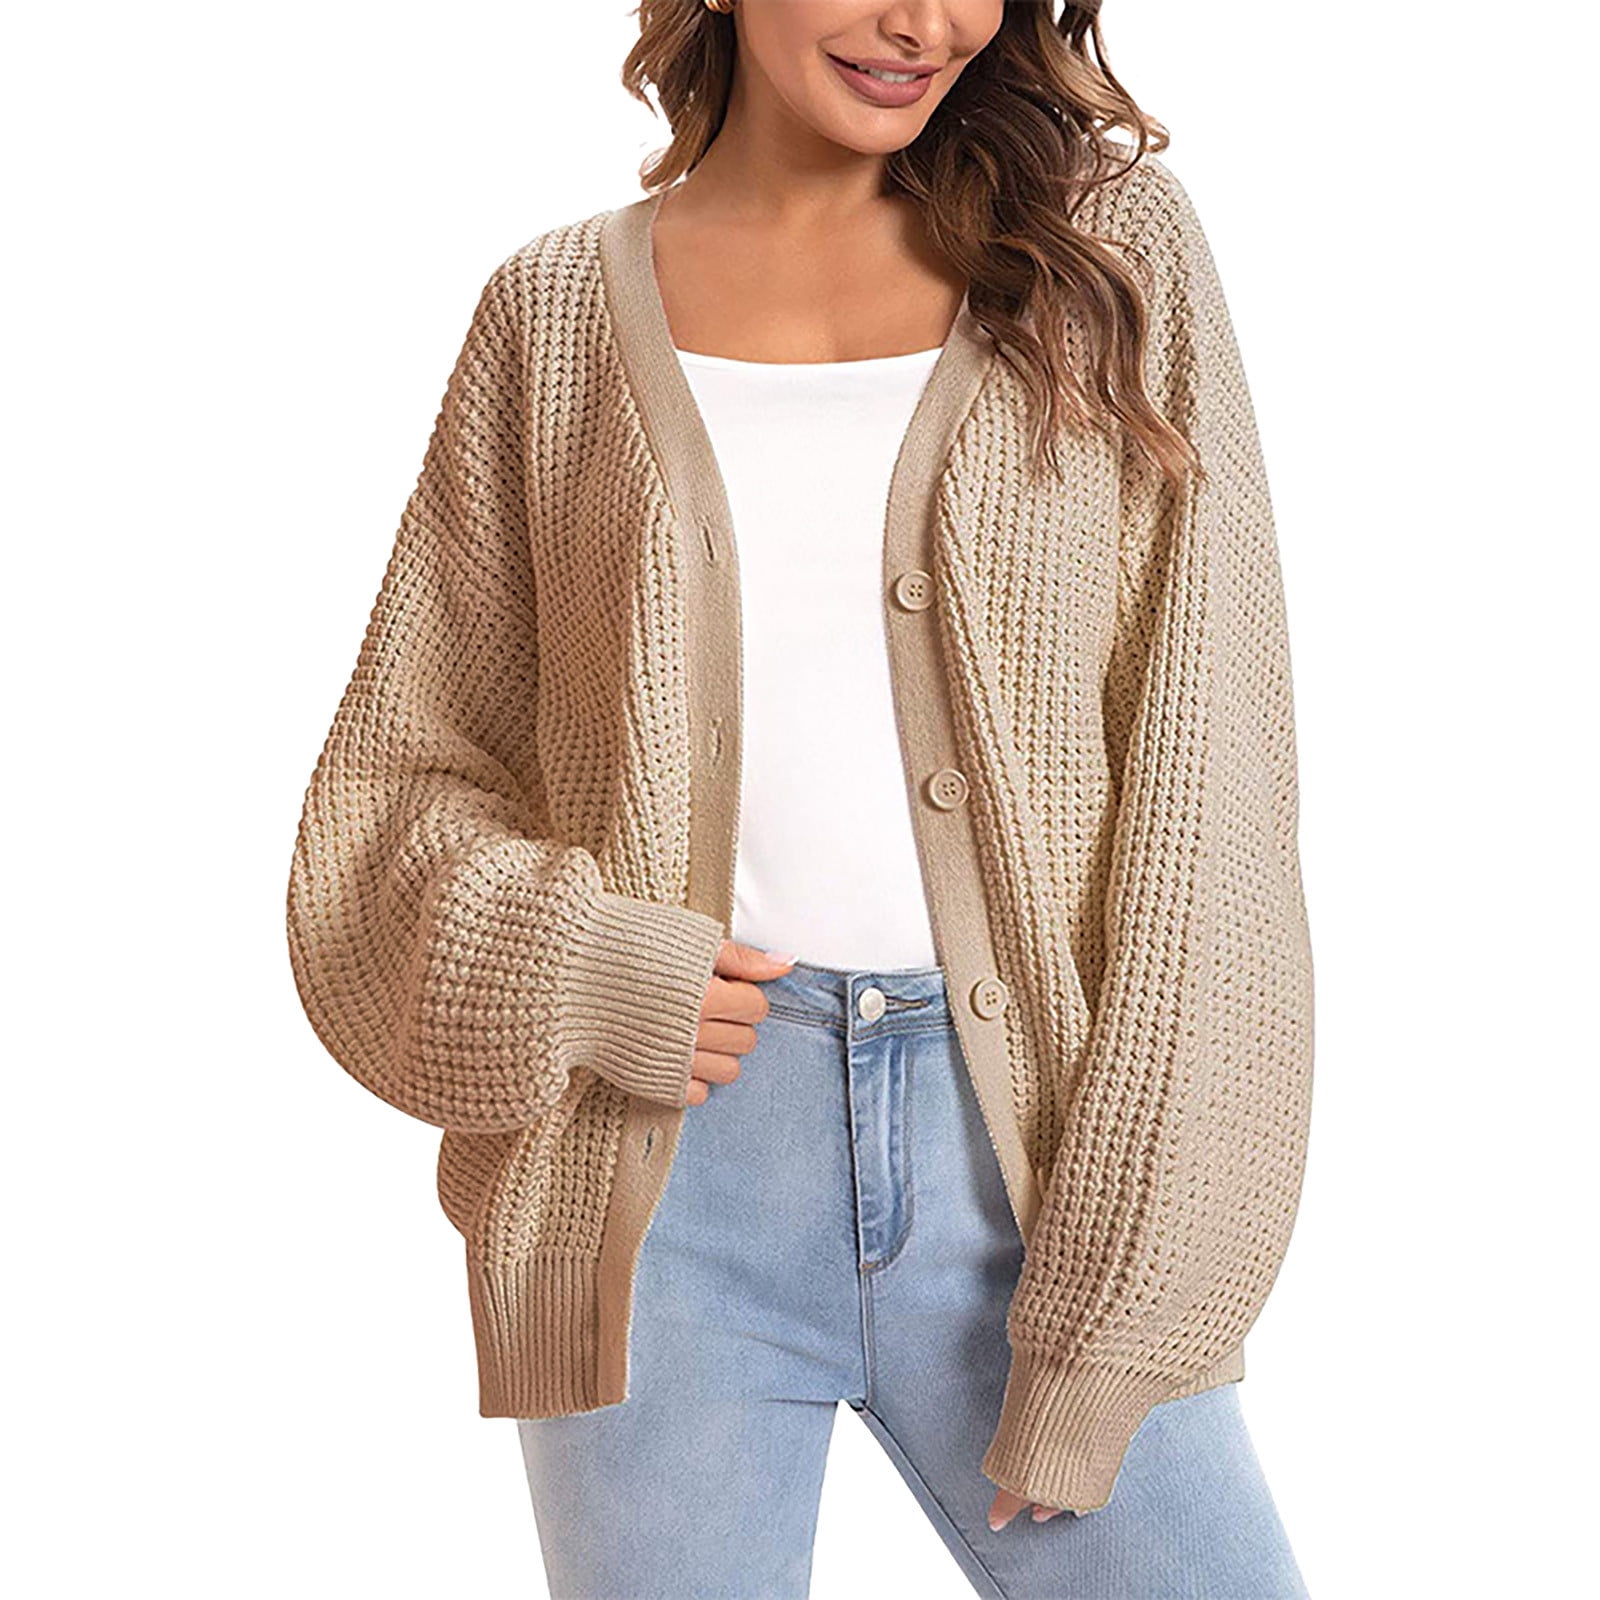 Women's Cardigan Sweaters Outwear Fall Winter Lightweight Coat Knitted  Casual Long Sleeve Button Pure Jackets